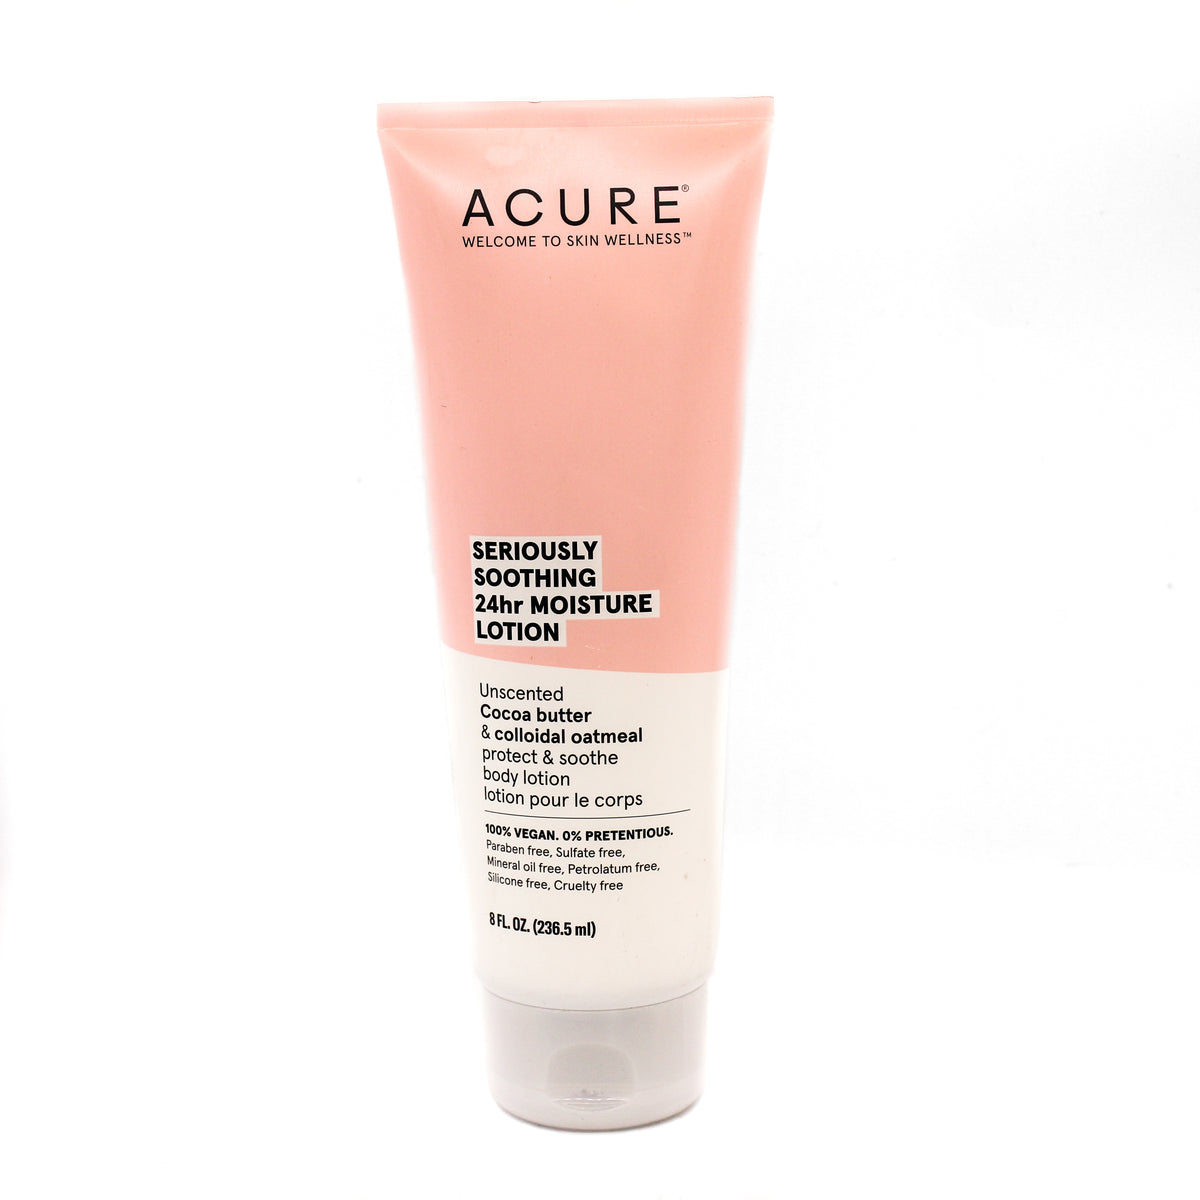 Acure Seriously Soothing 24hr Moisture Lotion